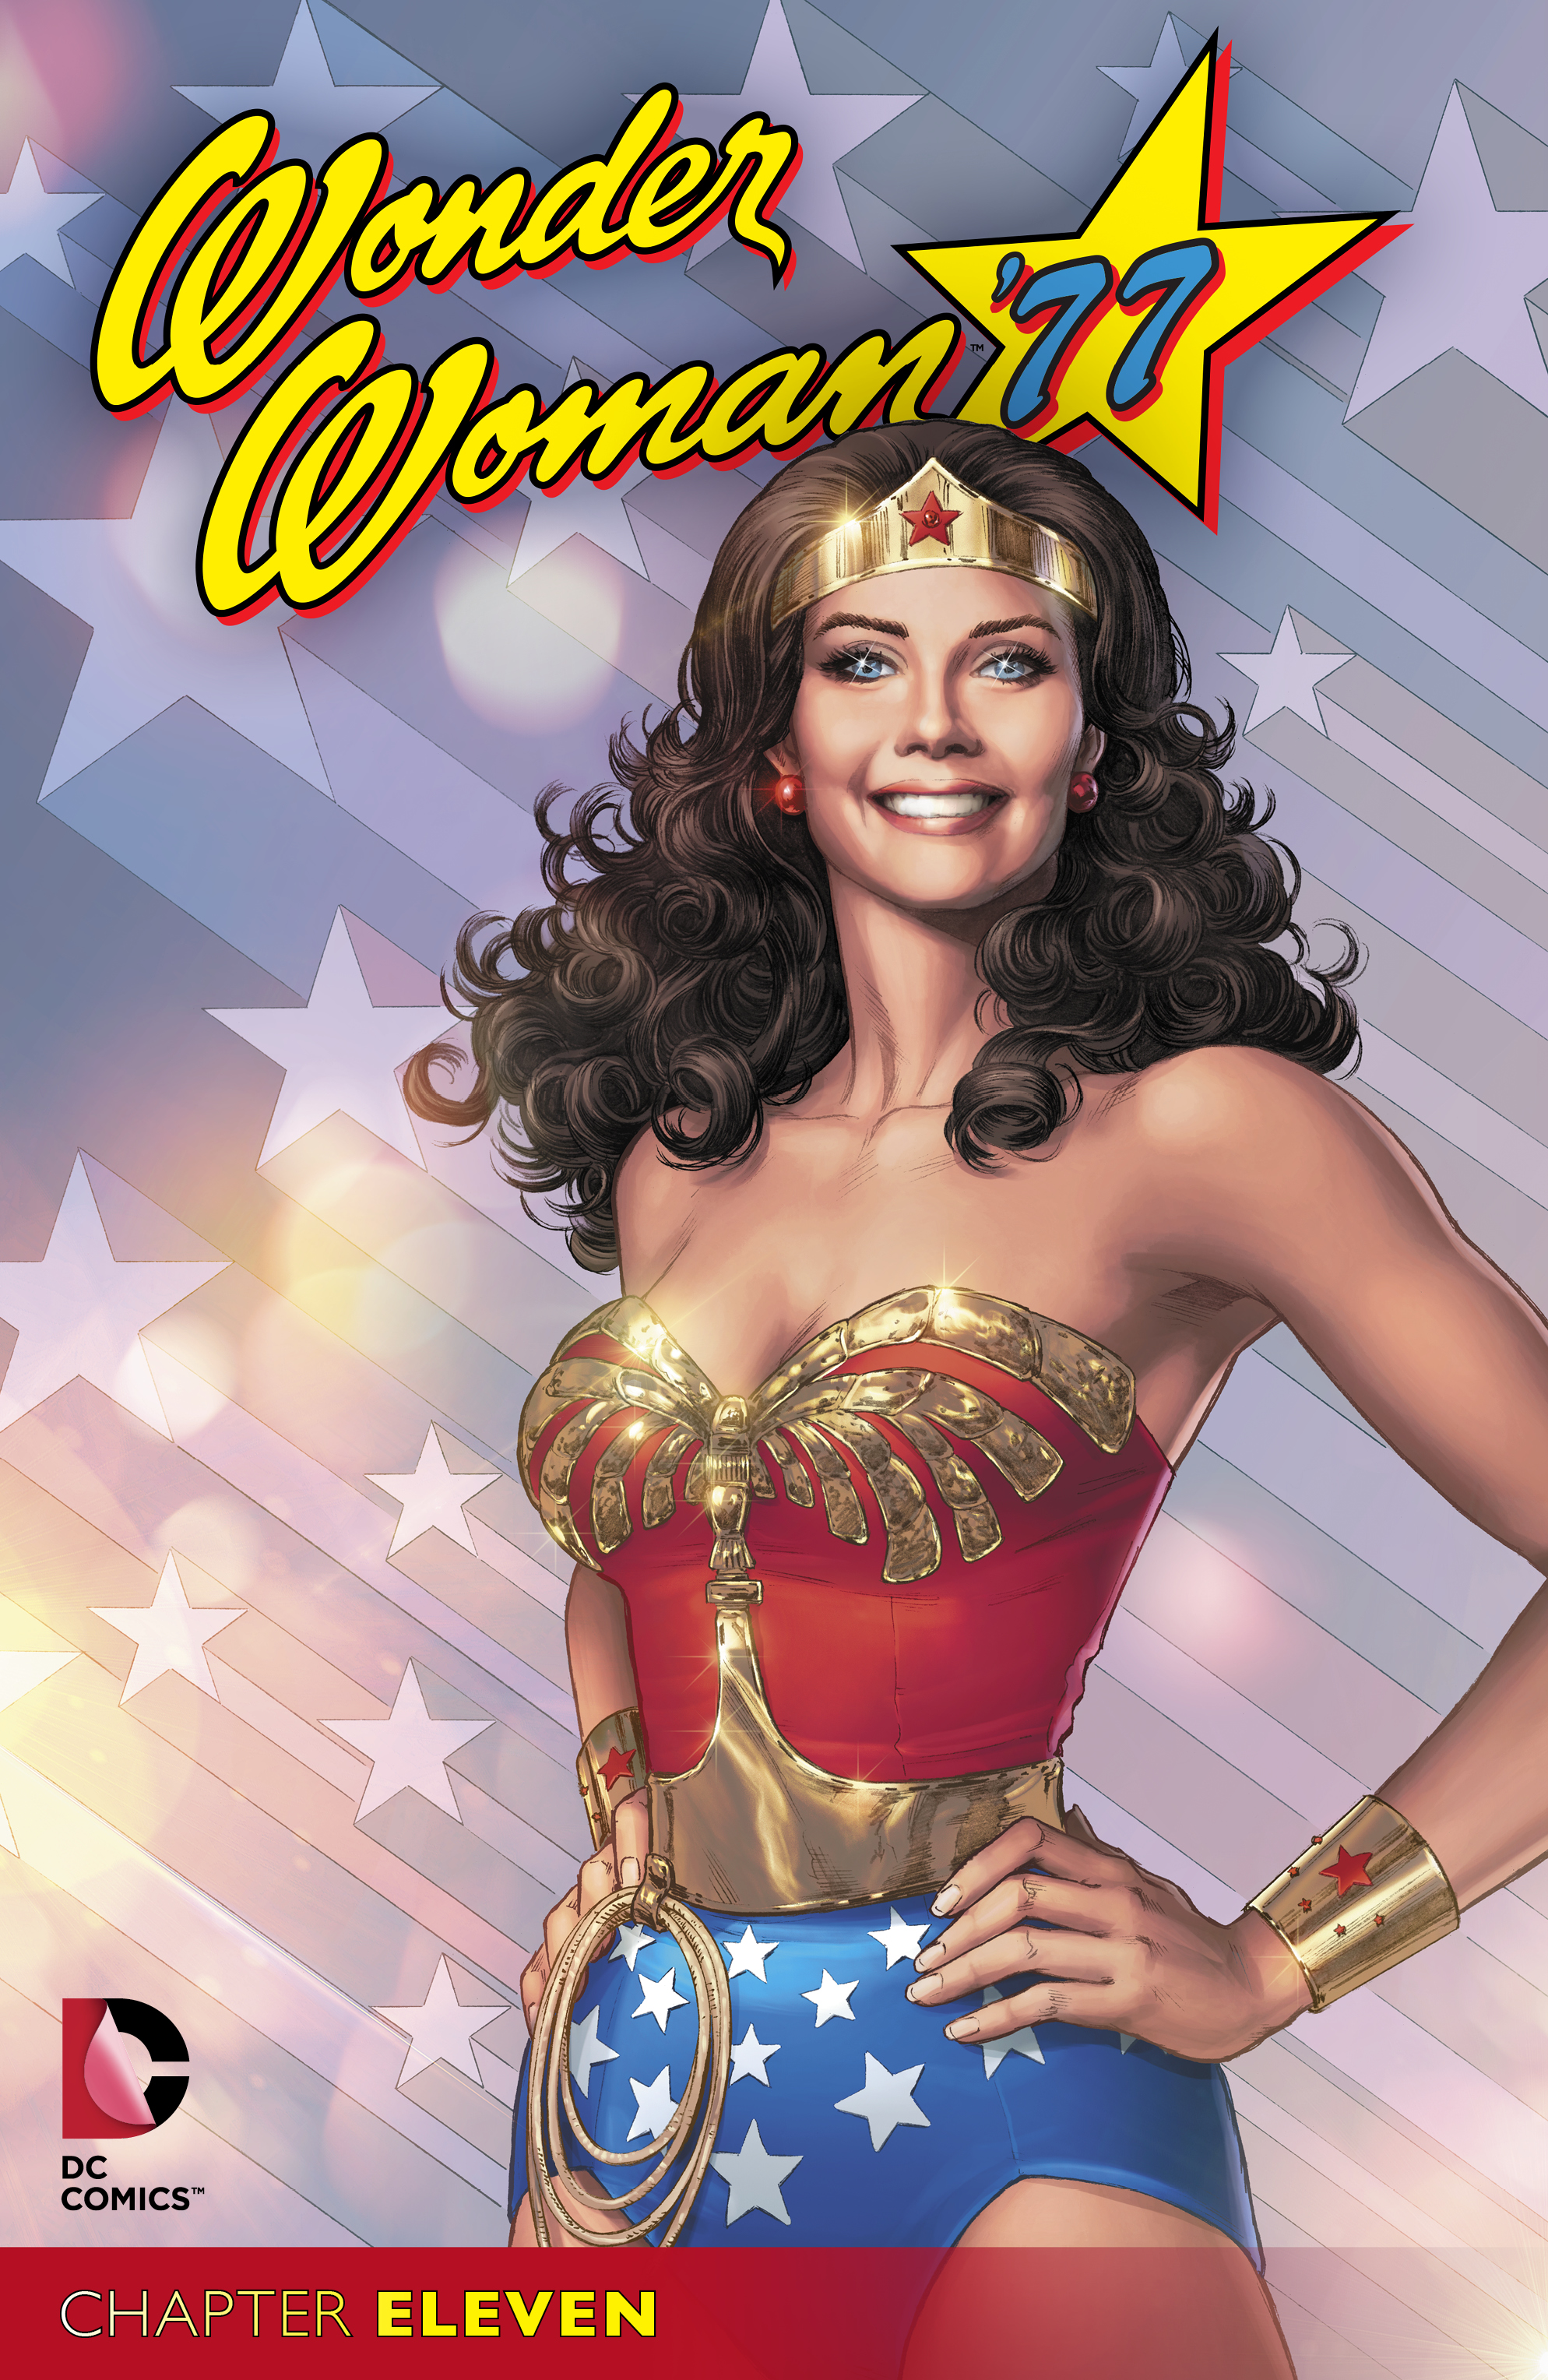 Wonder Woman '77 #11 preview images